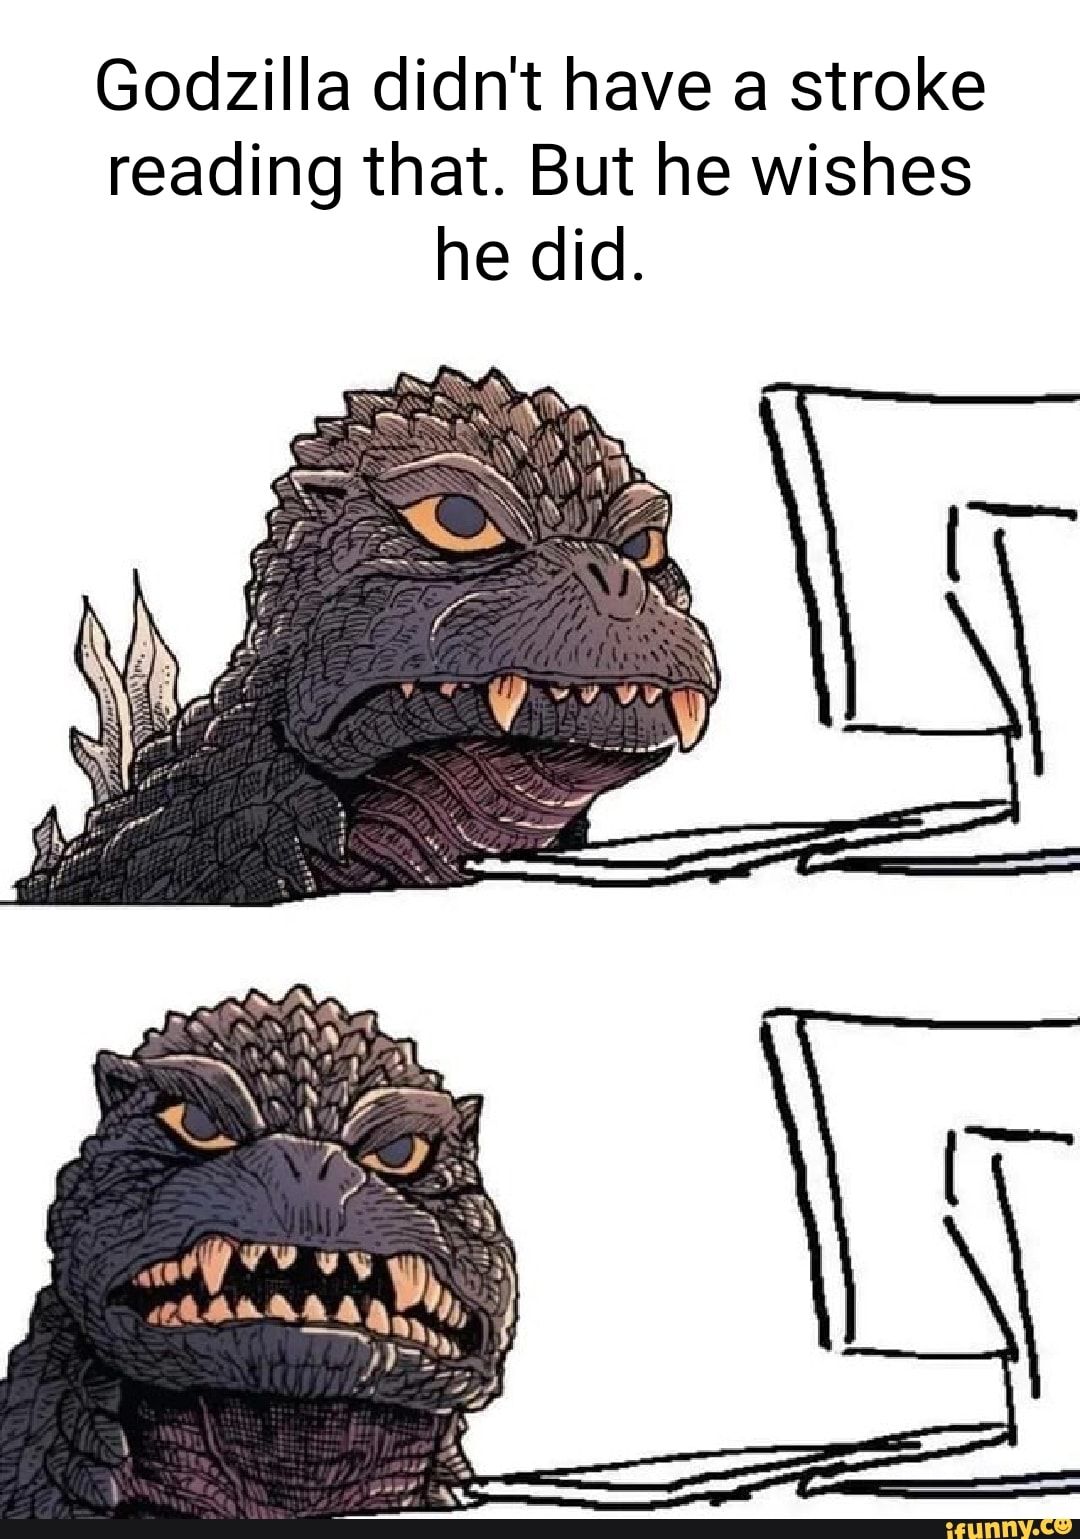 godzilla-didn-t-have-a-stroke-reading-that-but-he-wishes-he-did-ifunny